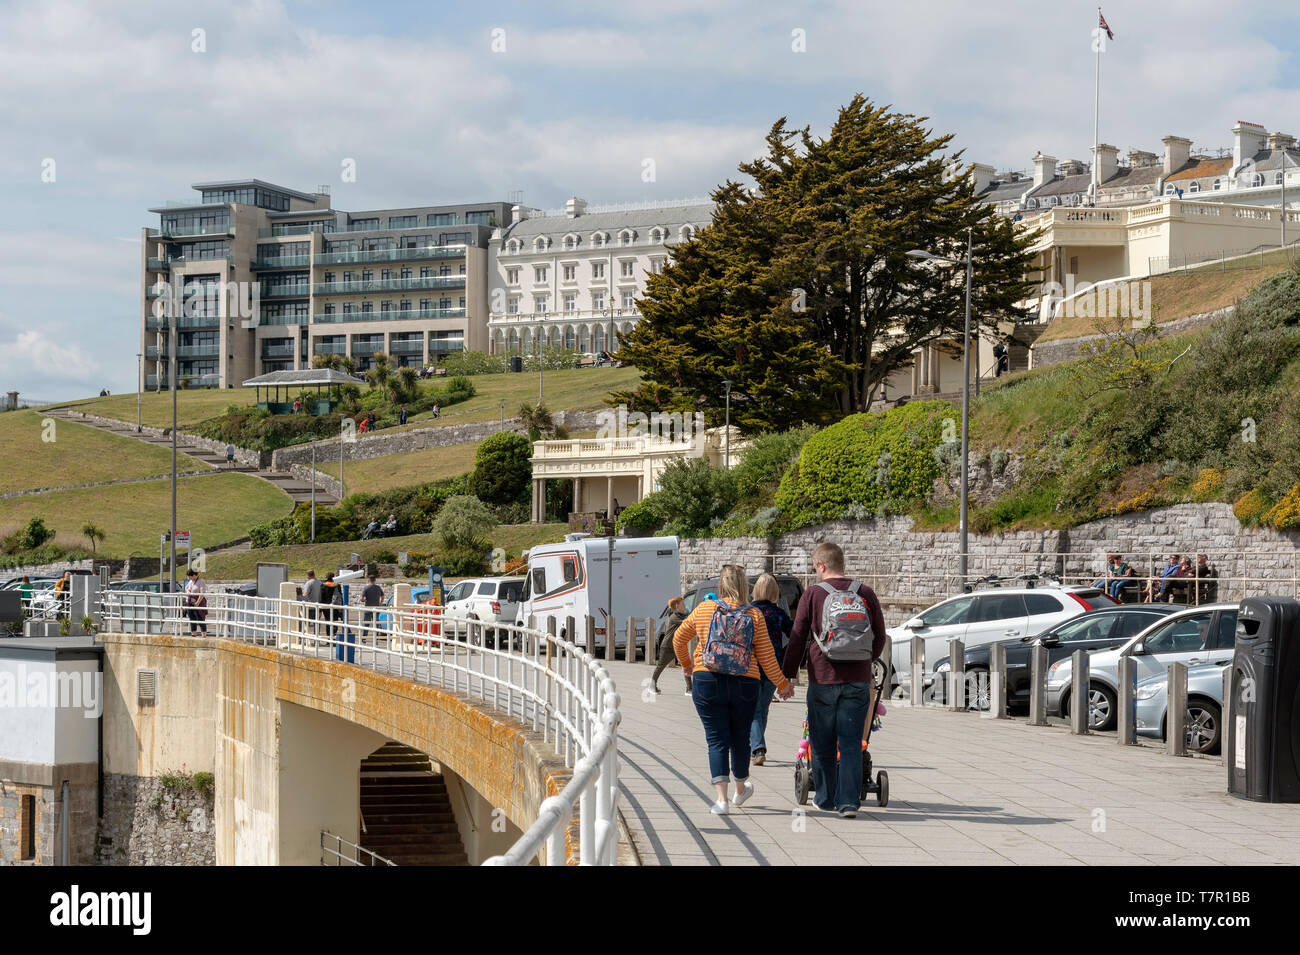 Plymouth, Devon, England, UK. May 2019. People walking on the waterfront with a view of property on The Hoe area of Plymouth UK. Stock Photo